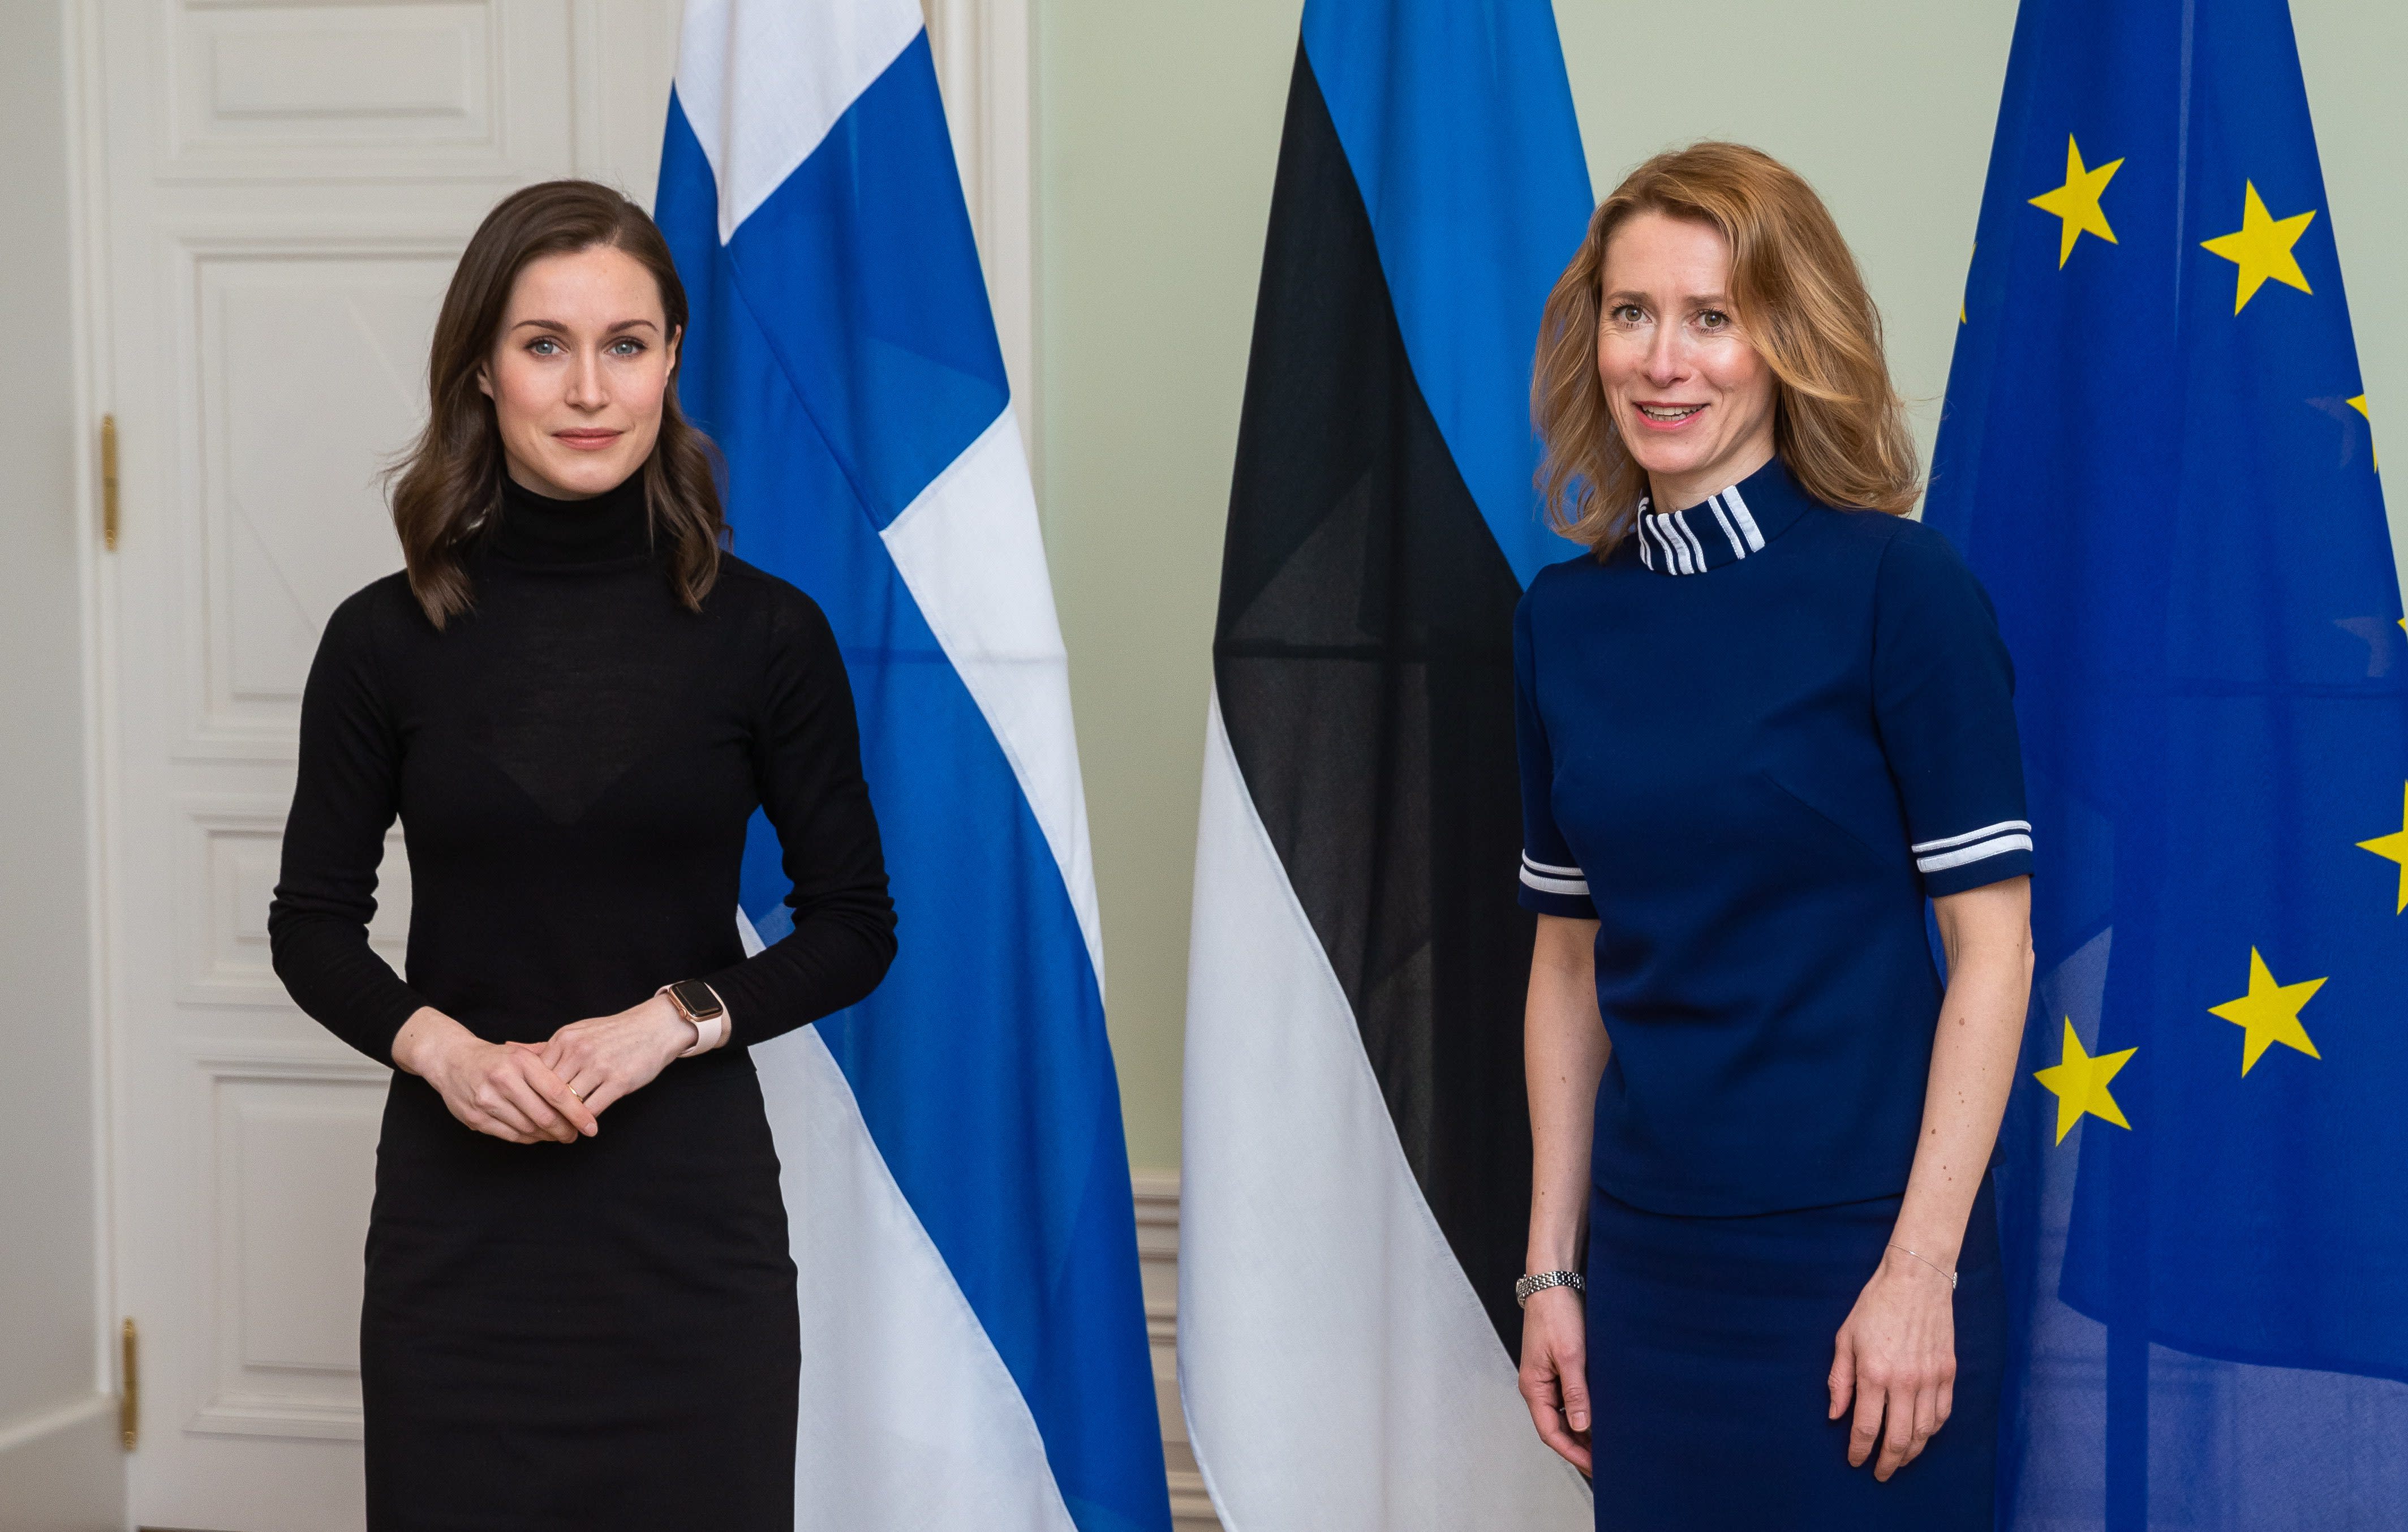 The Prime Minister of Estonia promises "as fast as a lightning" ratification if Finland submits a NATO application